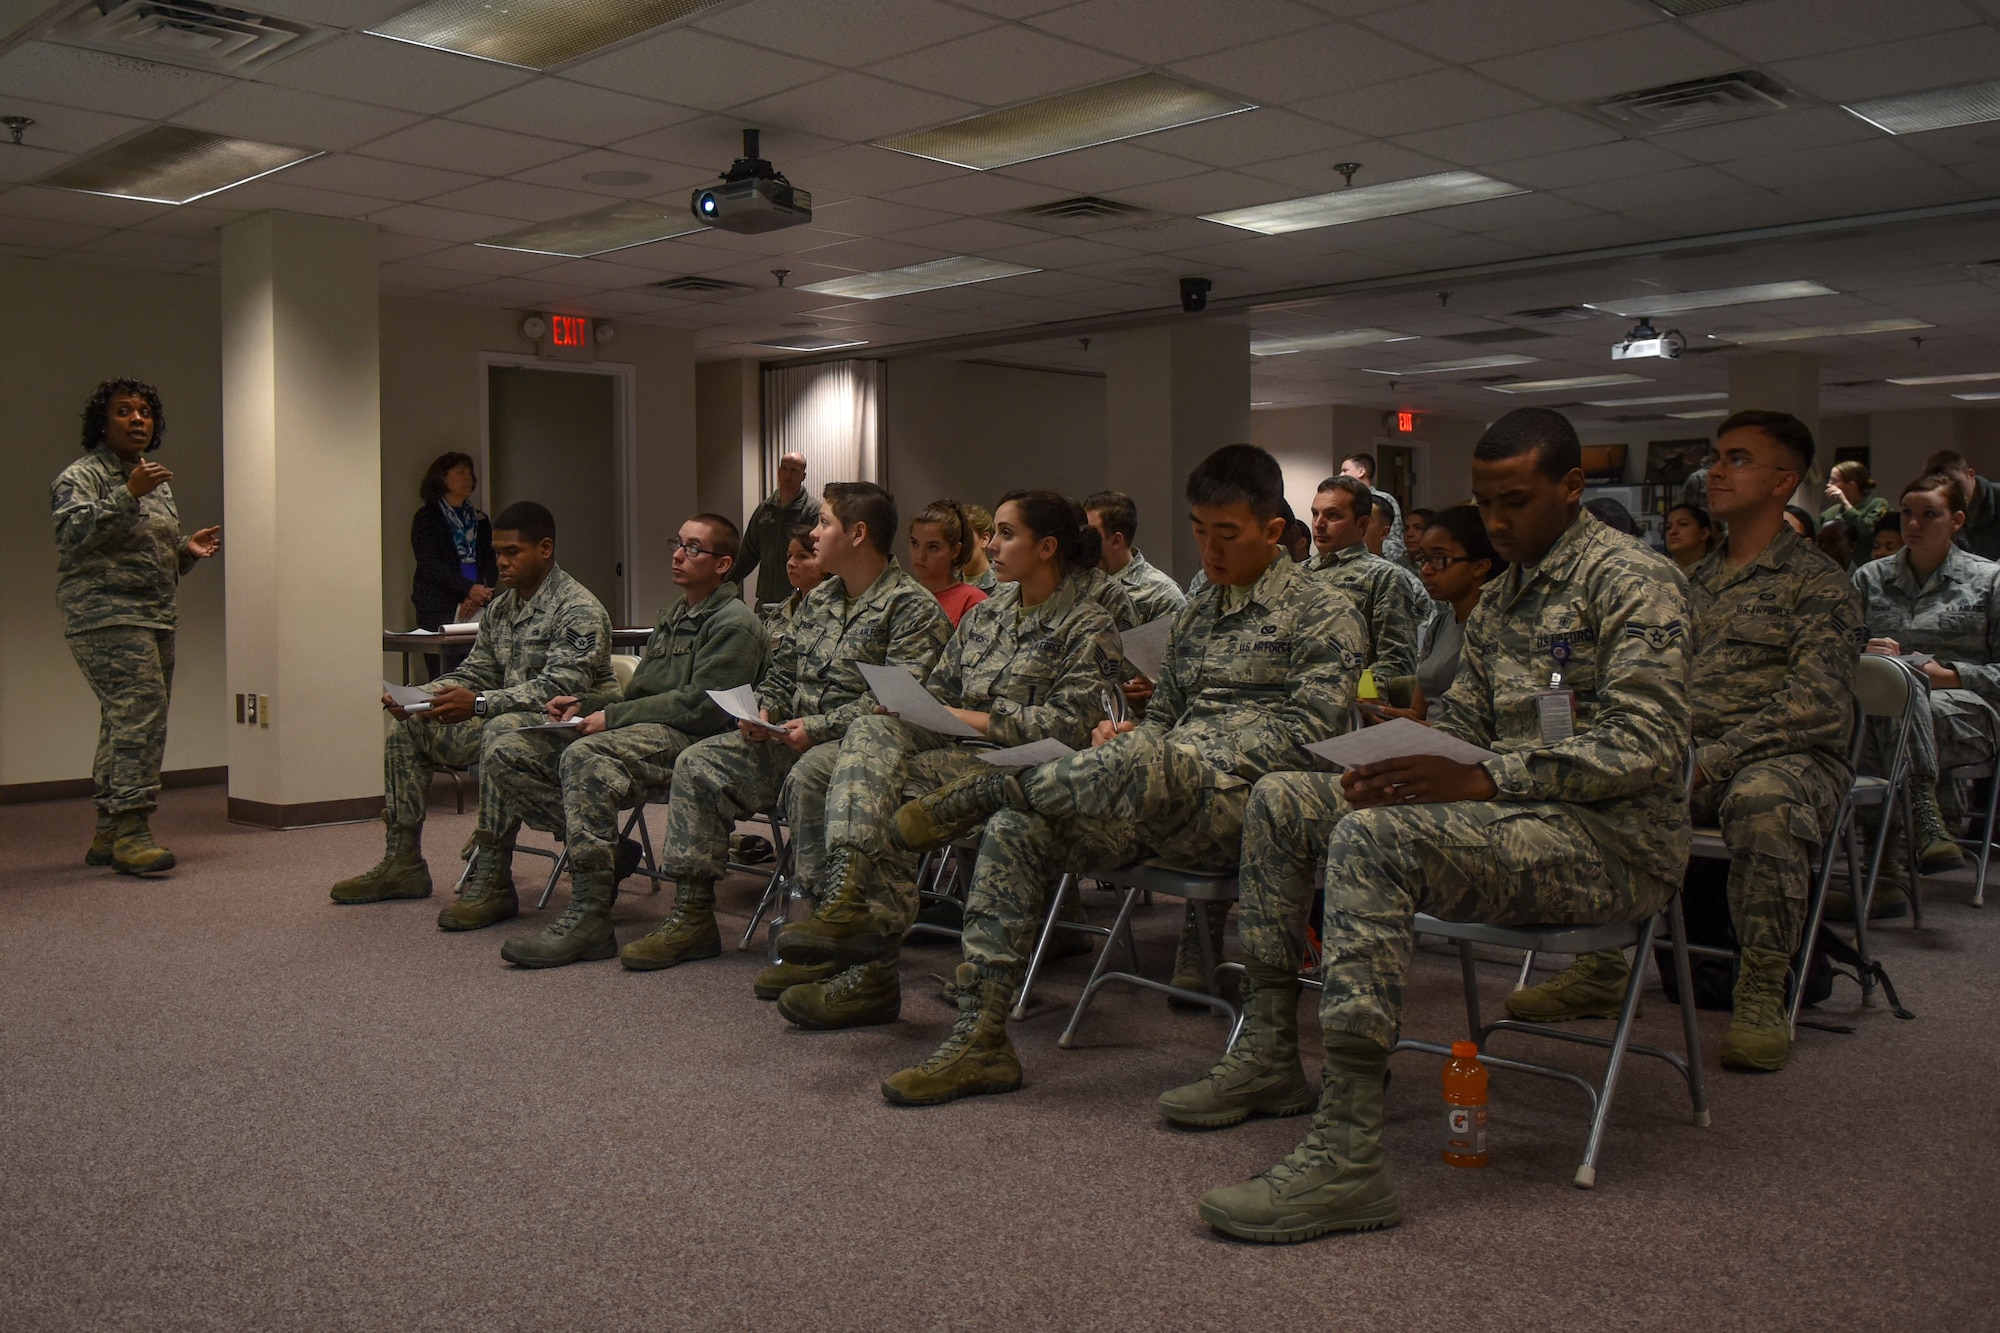 Master Sgt. Angenette Caballero, 4th Force Support Squadron superintendent of education and training, gives an introduction on various ways to commission, Feb. 9, 2016, at Seymour Johnson Air Force Base, North Carolina. More than 50 Airmen attended a briefing about commissioning into several different medical careers fields. (U.S. Air Force photo/Airman Shawna L. Keyes) 